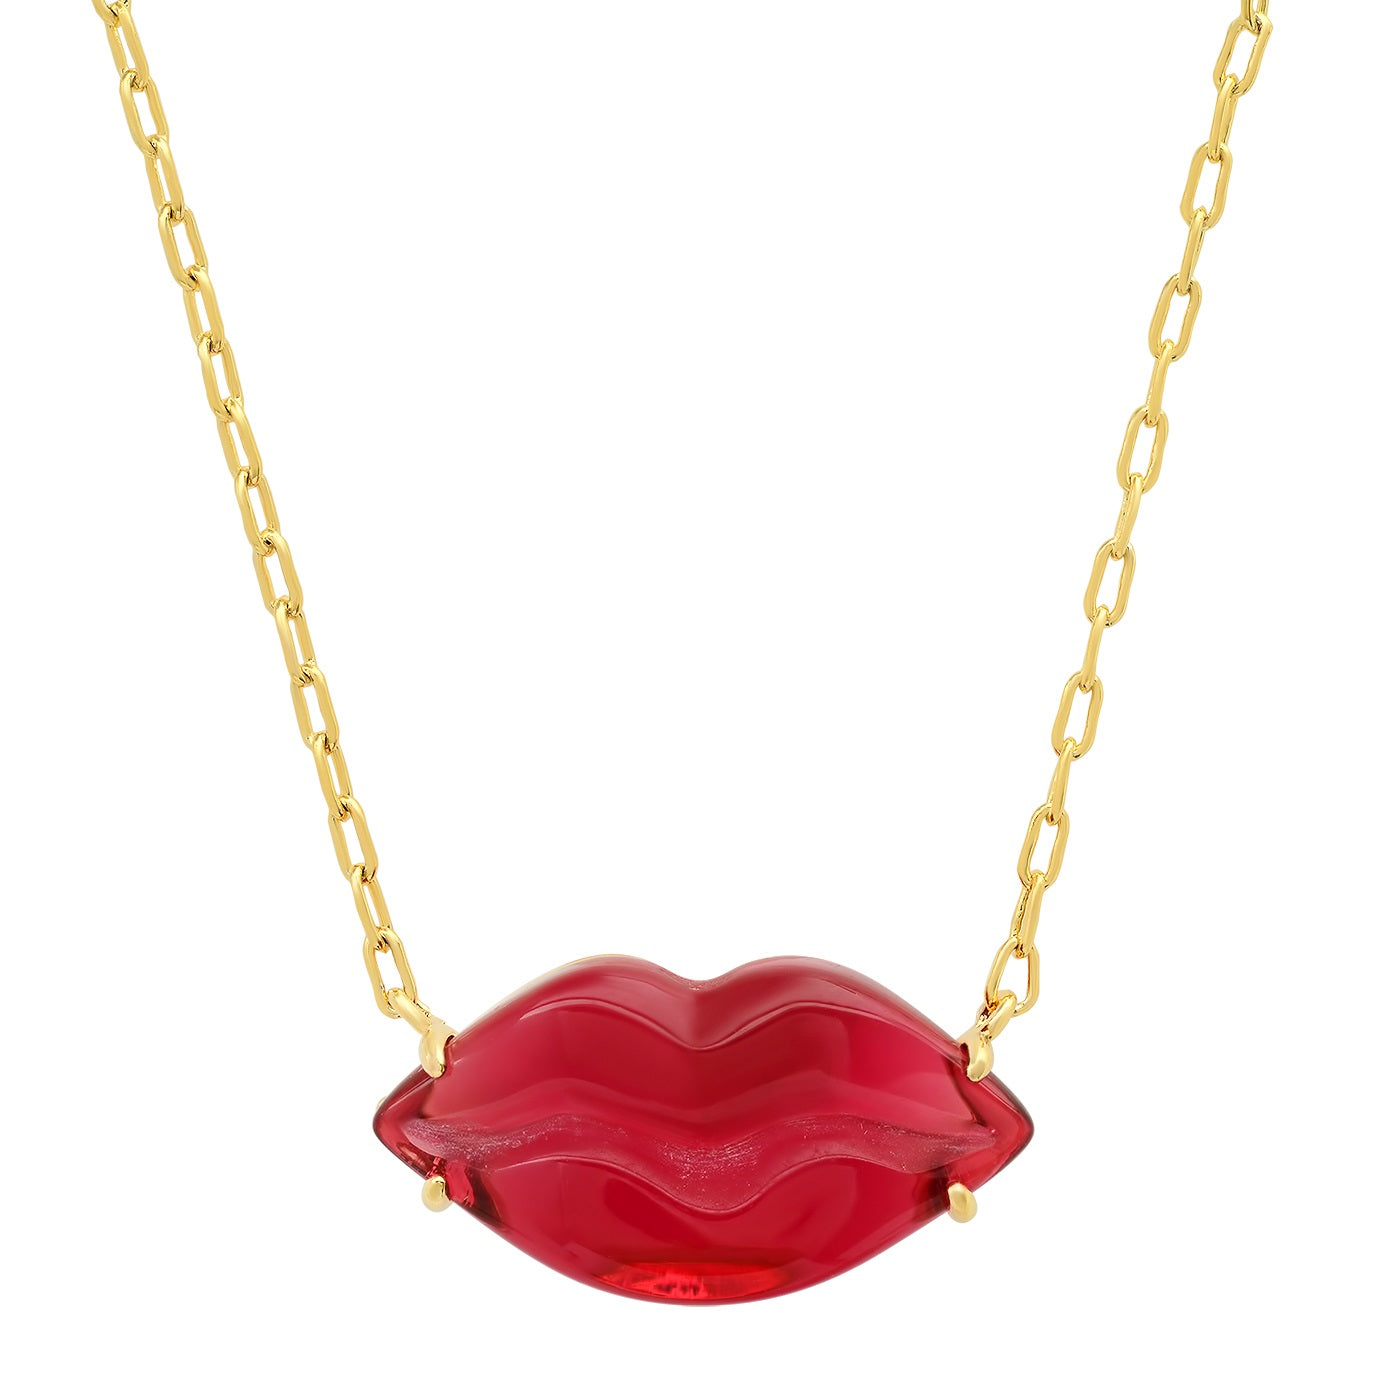 Red Lip Pendant Necklace